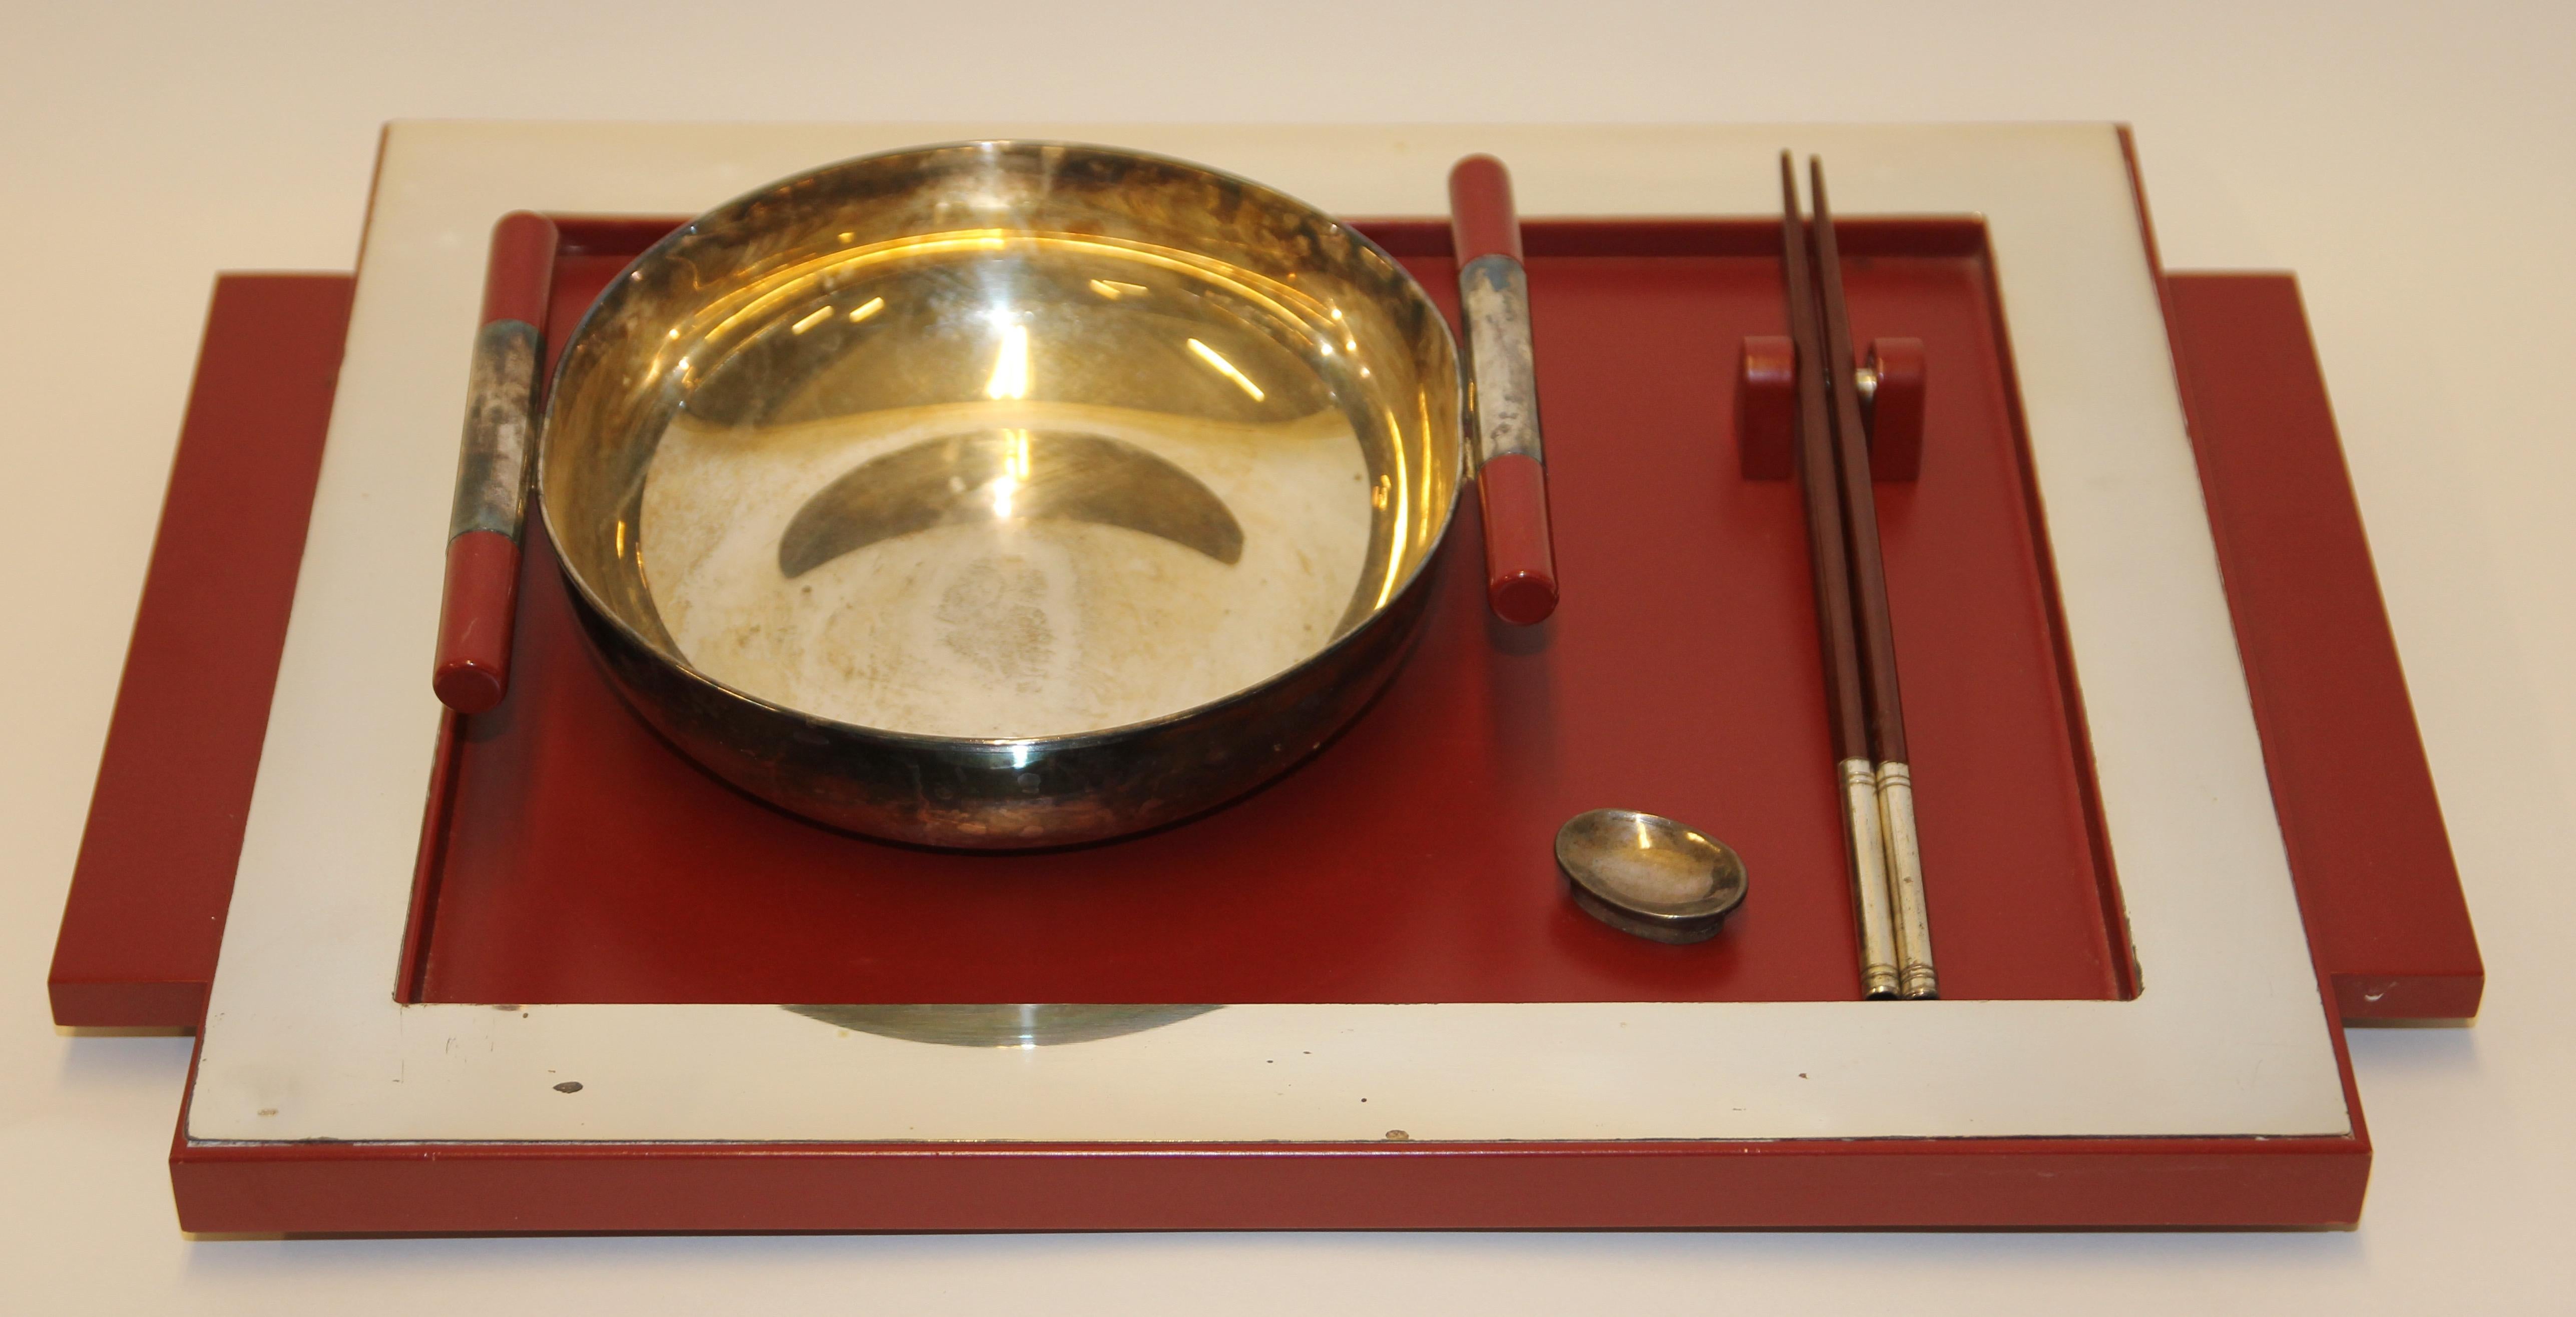 Two sets of vintage dining, serving, food tray, japan, china, Asian art, sterling silver.

Tray frame, bowl and handles of the chopsticks made of 925 sterling silver.
Hallmarked.

Various wear and tear in places.

Dimensions are for the tray.